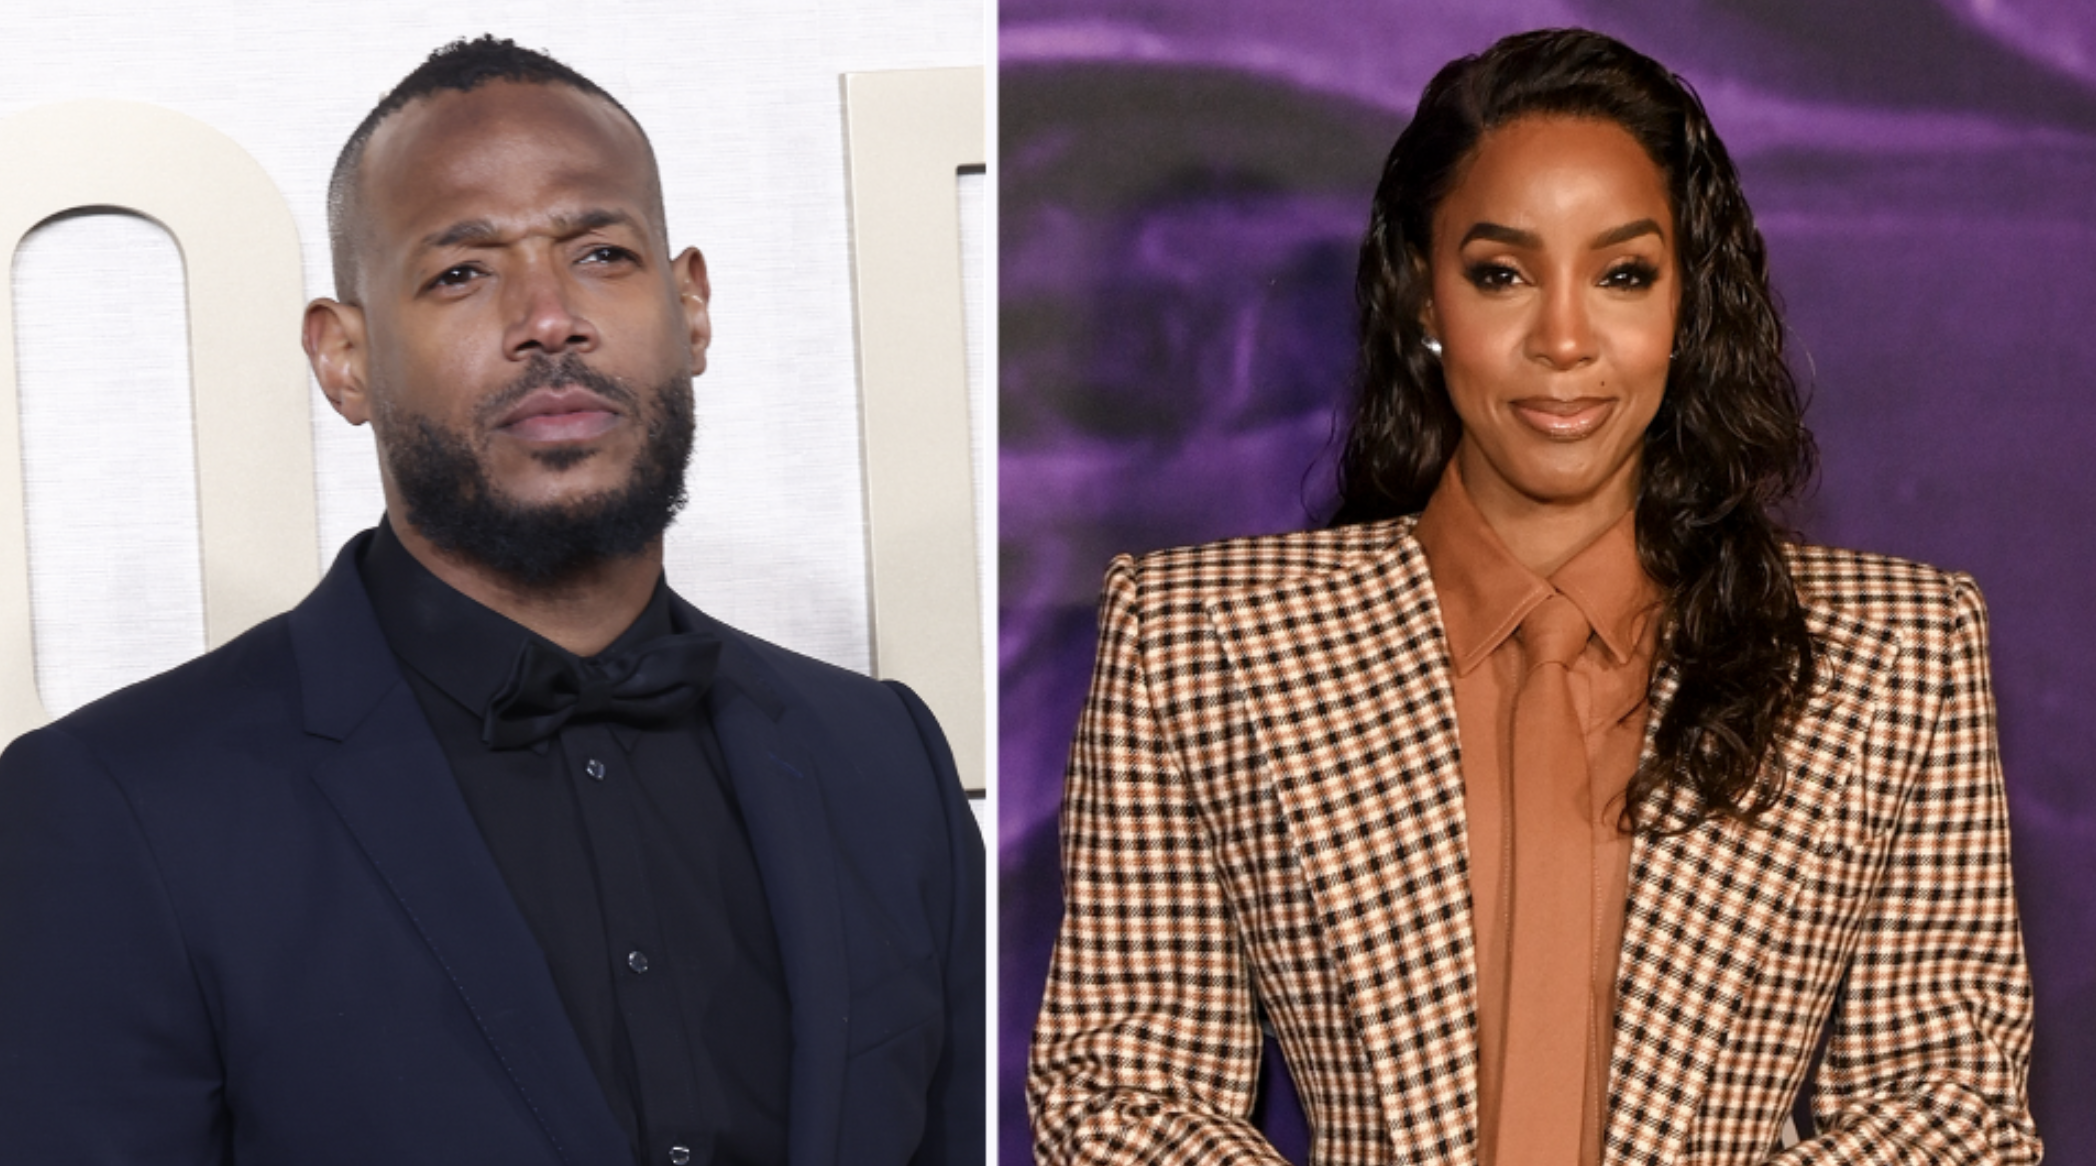 Marlon Wayans Defends Kelly Rowland Over Reports She Walked Off 'TODAY' Set Following Dressing Room Dispute